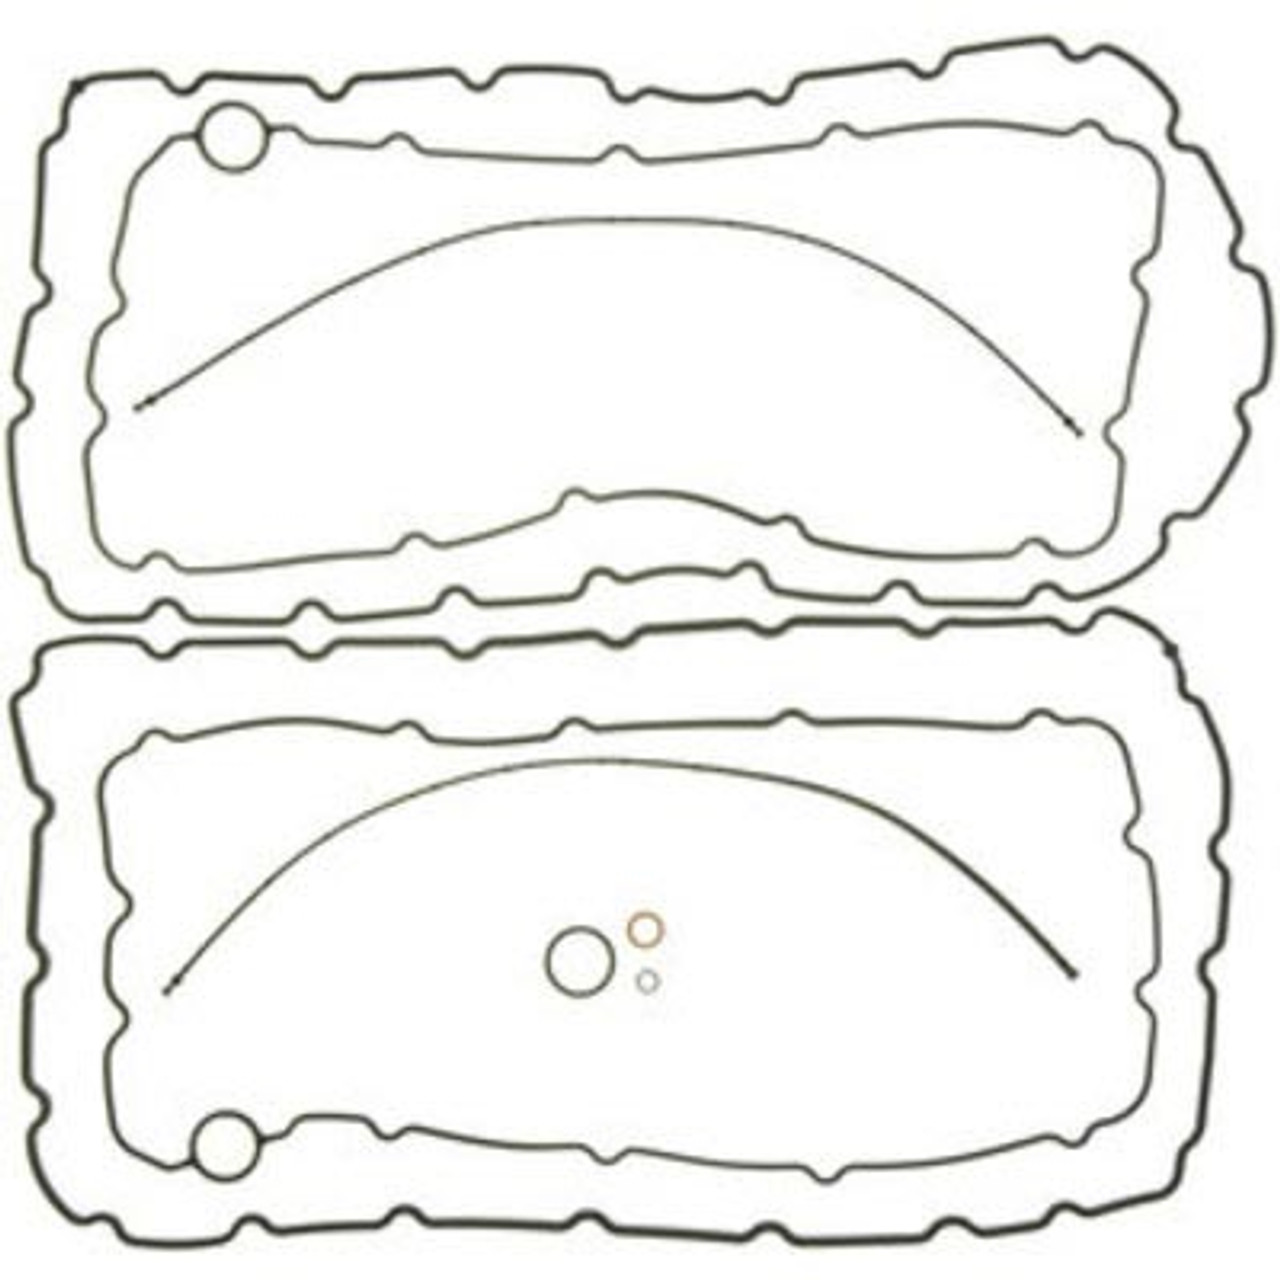 Mahle Oil Pan Gasket 2003 to 2007 6.0L Powerstroke (MCIOS32271)-Main View